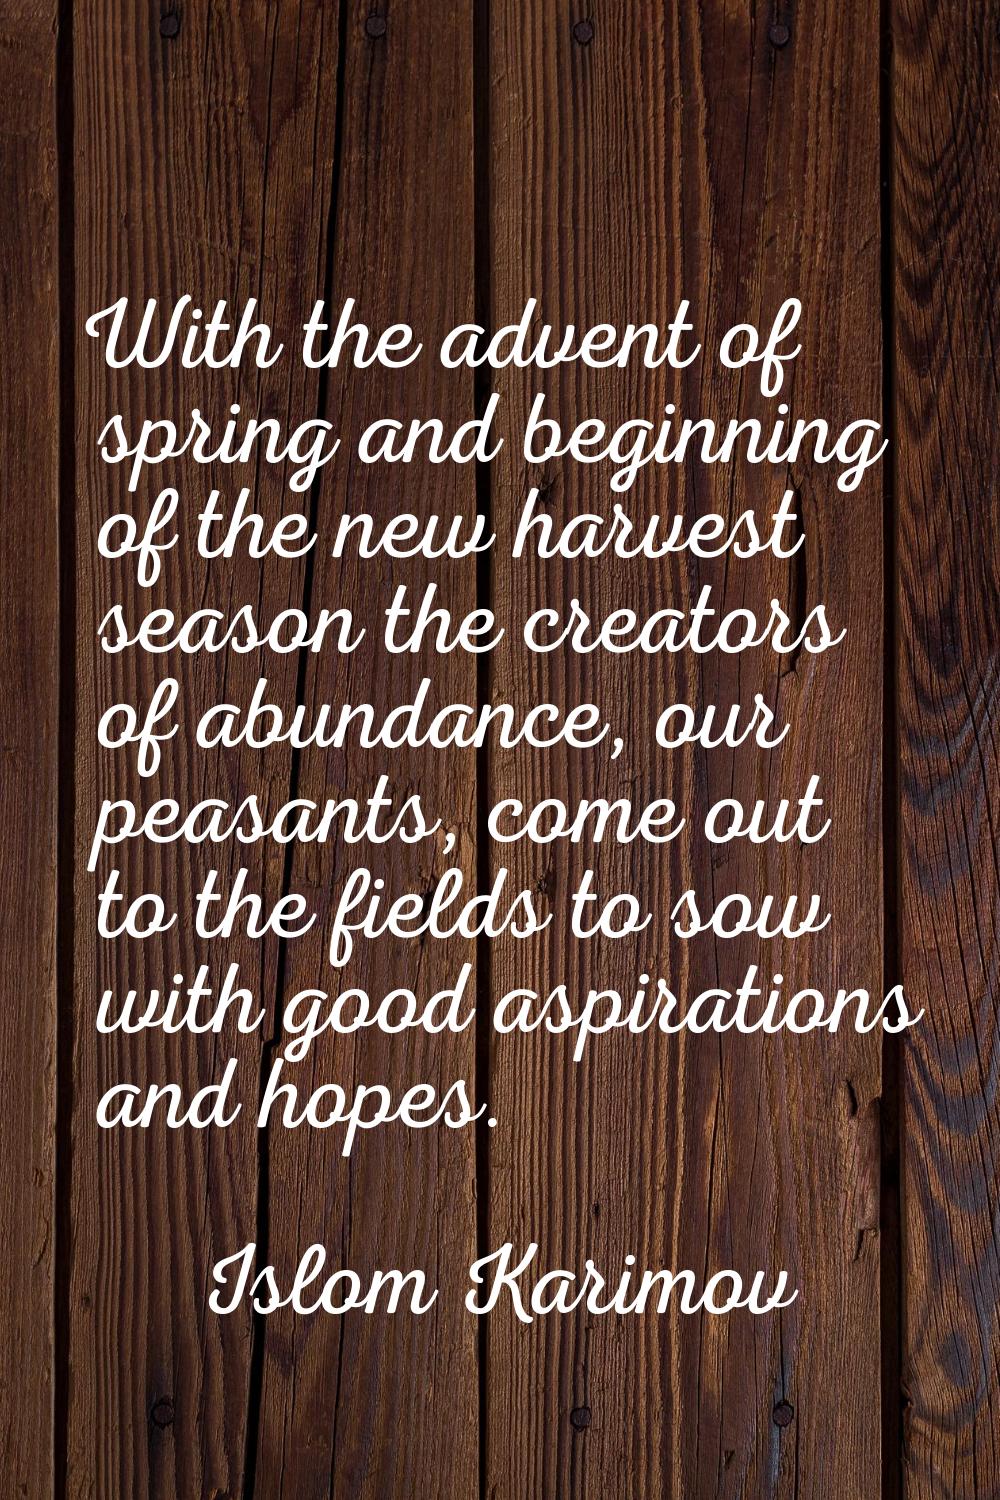 With the advent of spring and beginning of the new harvest season the creators of abundance, our pe